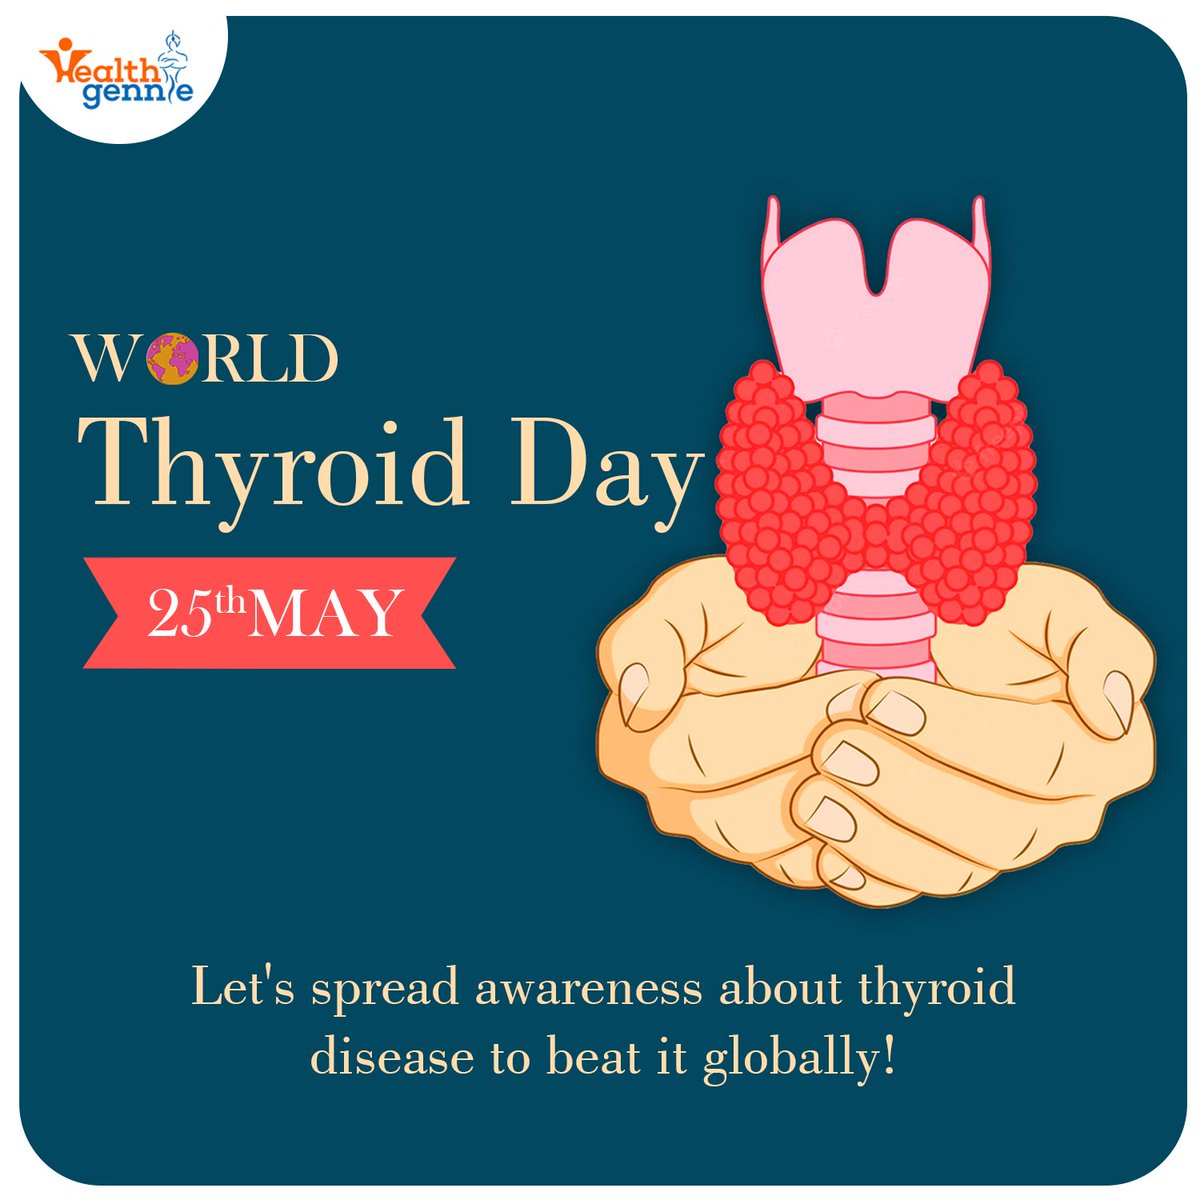 World thyroid day is dedicated to support people suffering from thyroid disease.

#thyroid #thyroidproblems #worldthyroidday #diseaseprevention